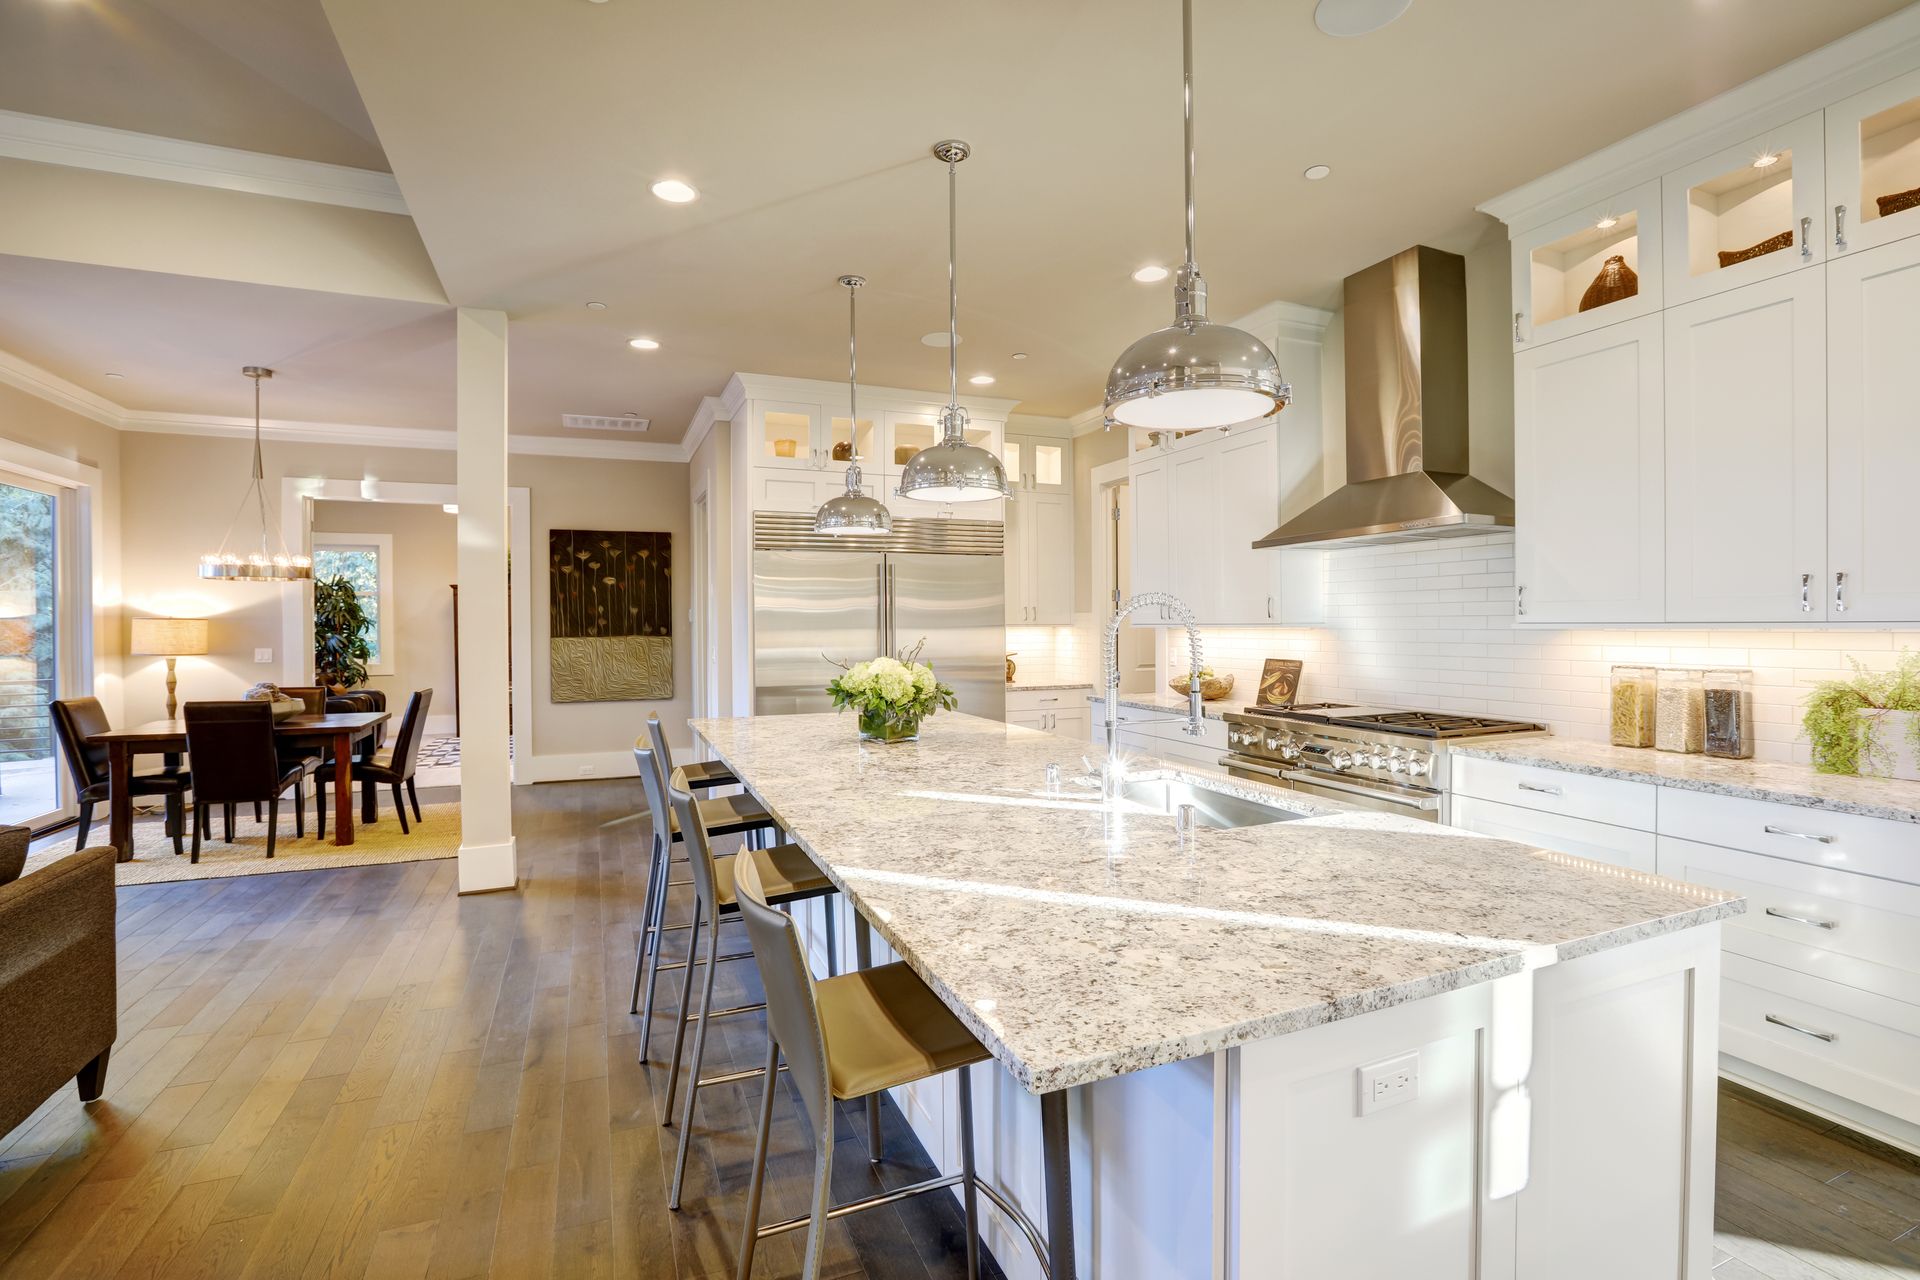 Elegant Kitchen With Marbled Countertop